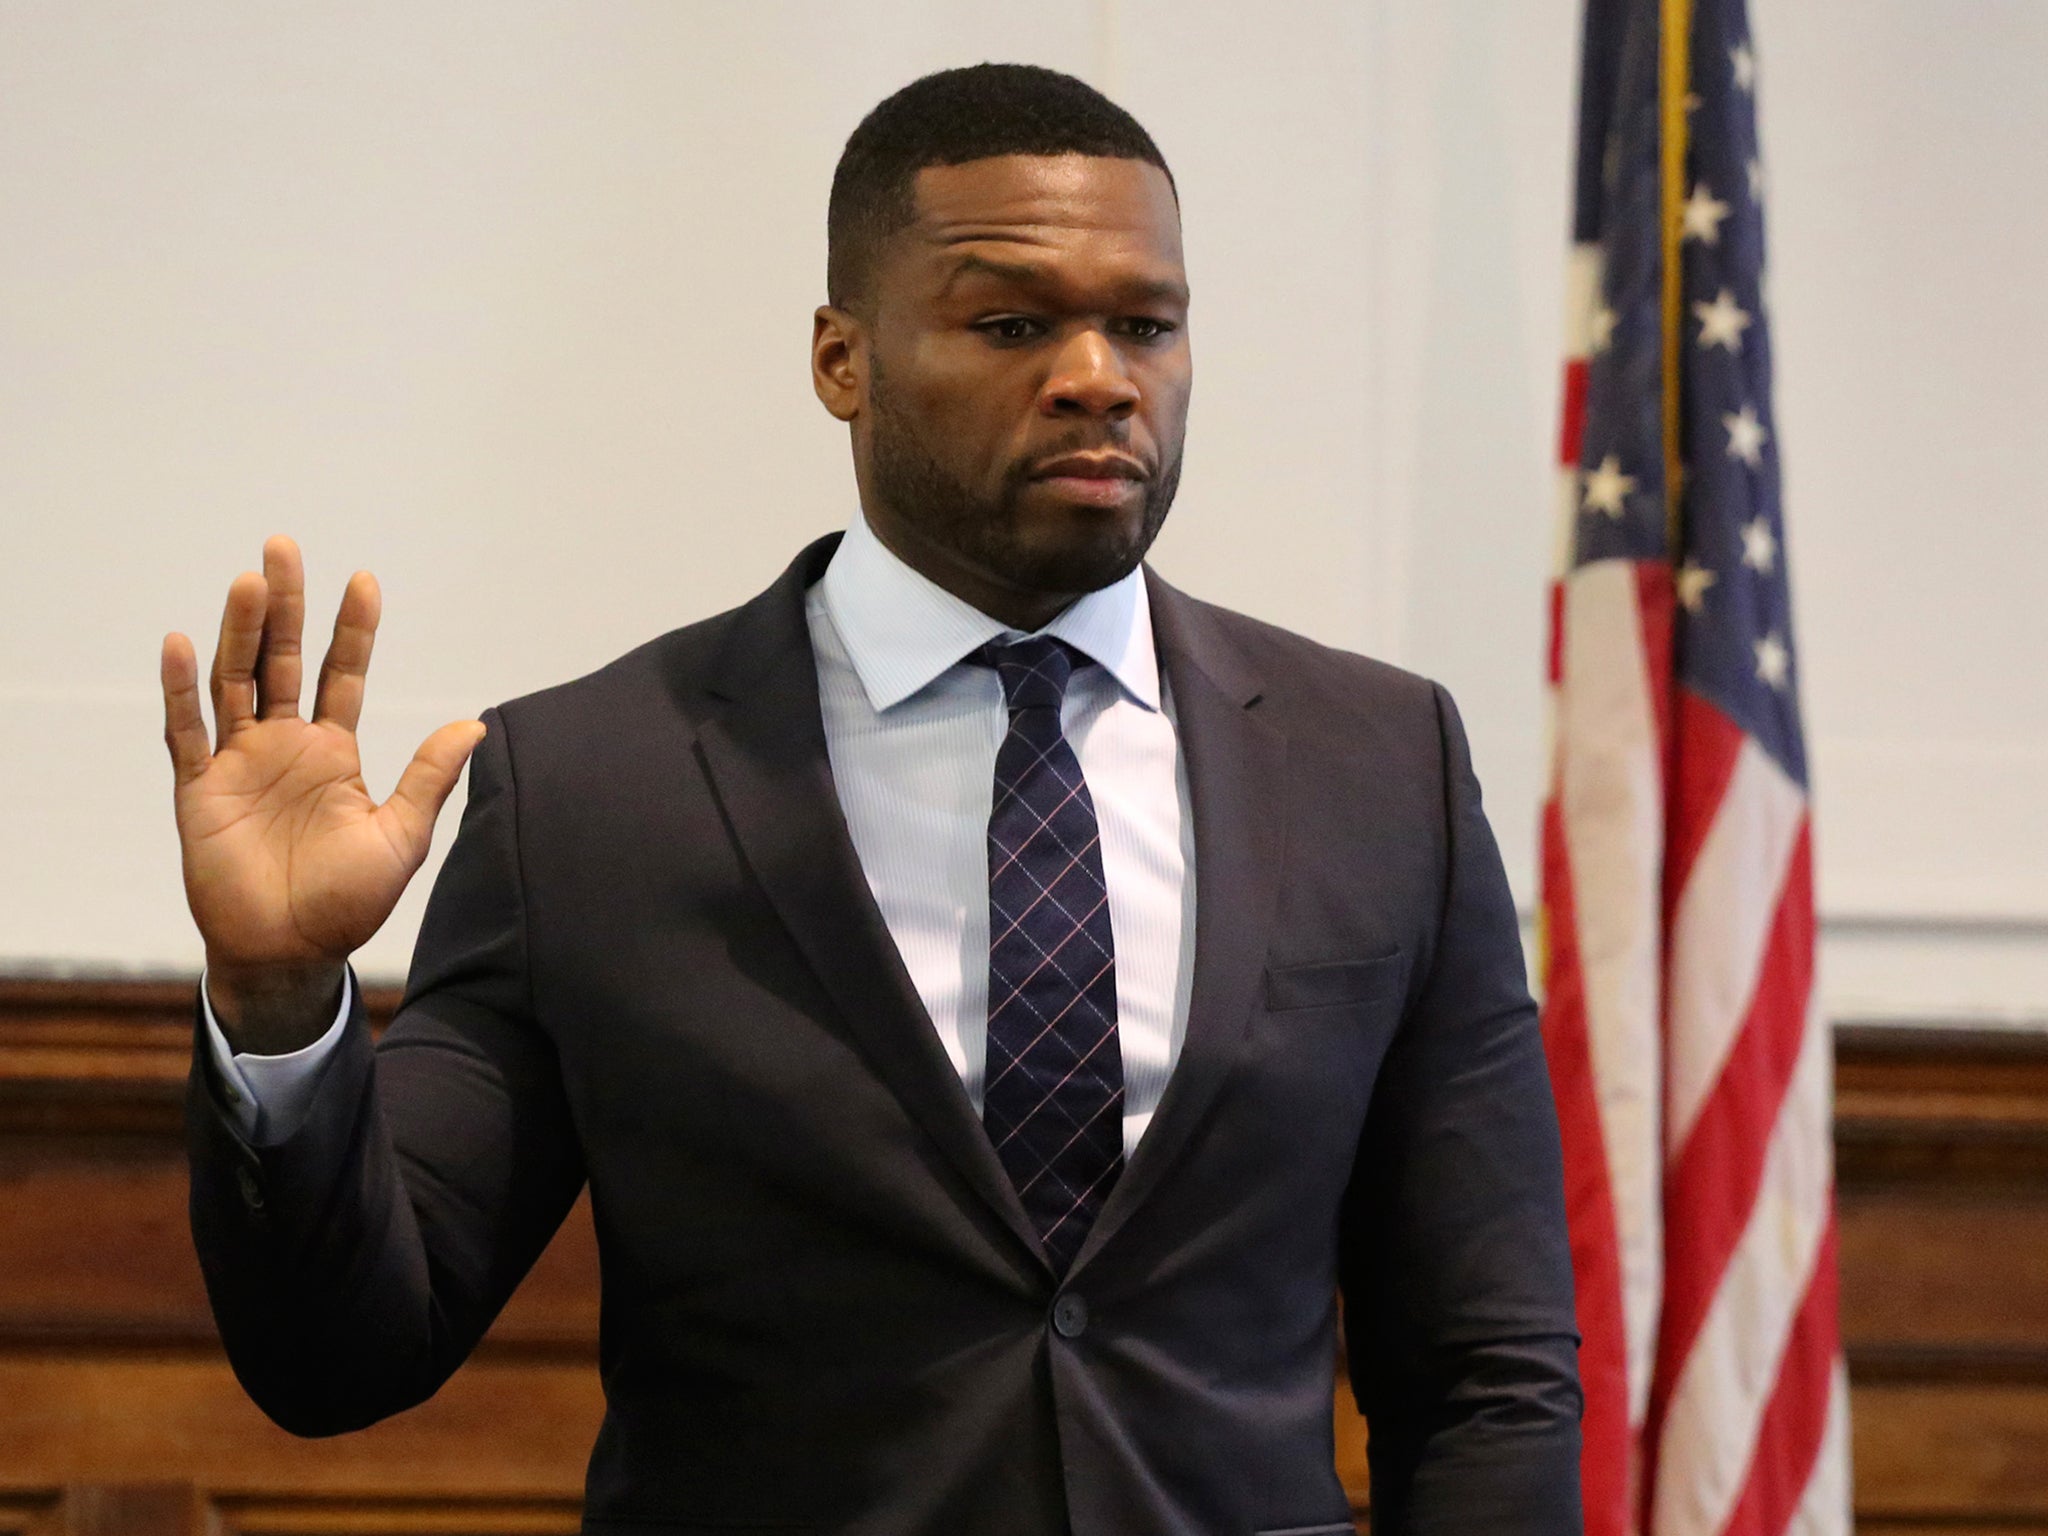 Rapper 50 Cent takes the oath as he appears in New York State Supreme Court in Manhattan, testifying in a lawsuit for a sex tape that was posted online. He recently filed for bankruptcy protection, reporting debts and assets in the range of $10 million to